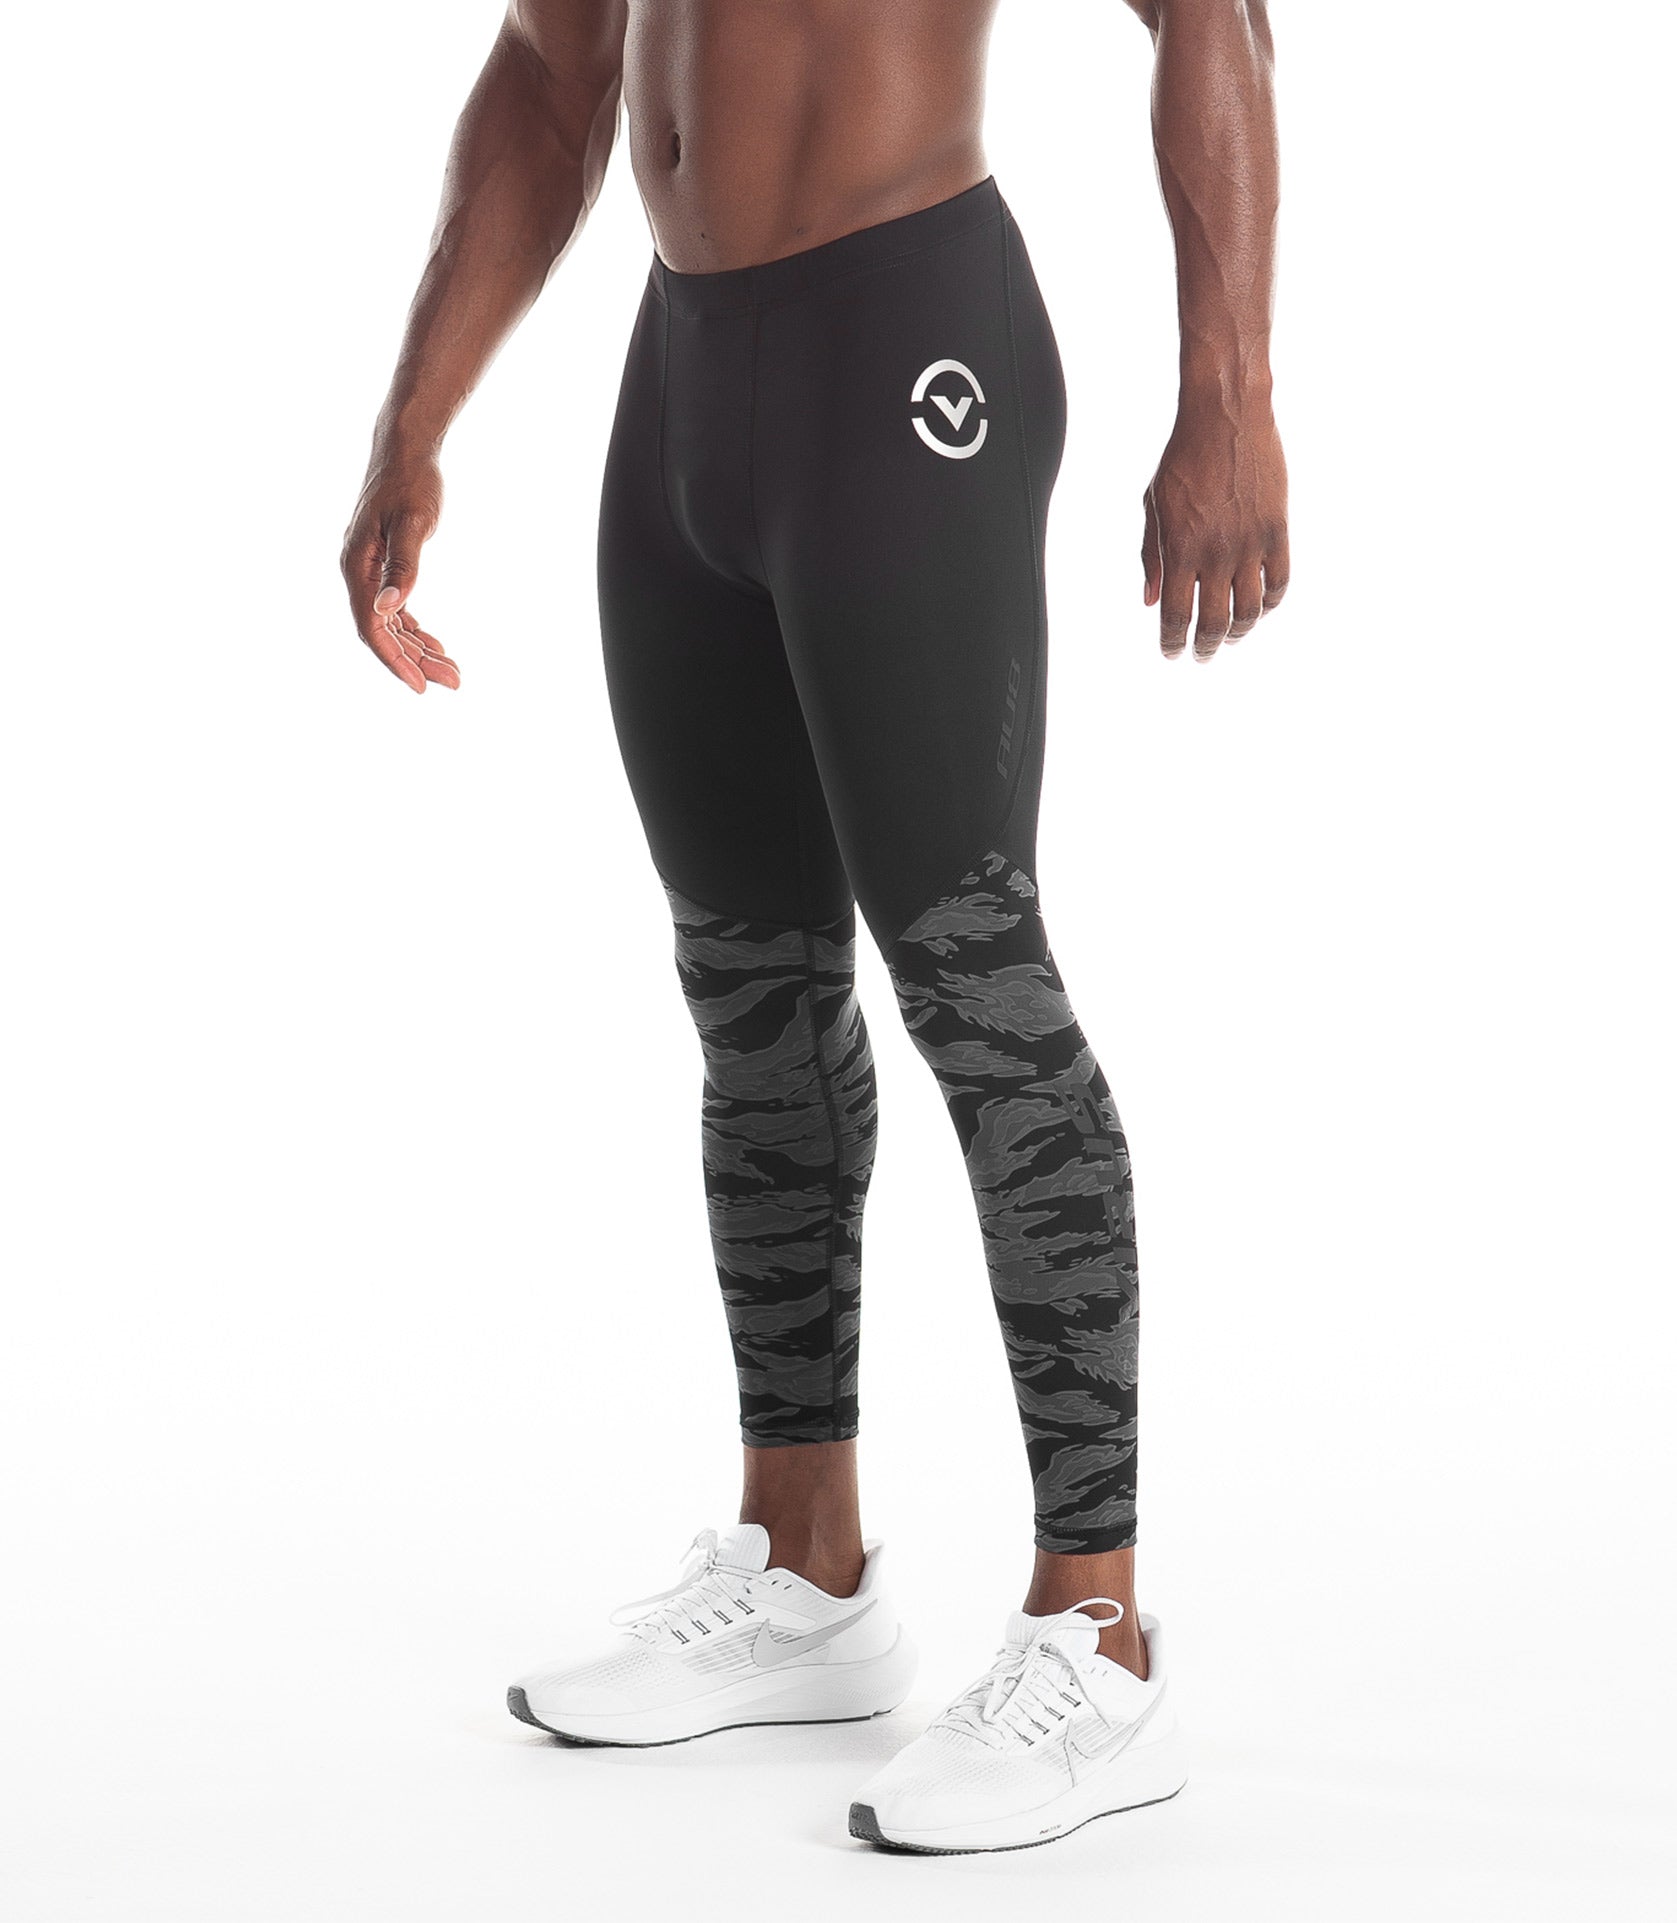 The Best Men's Compression Pants You Can Buy